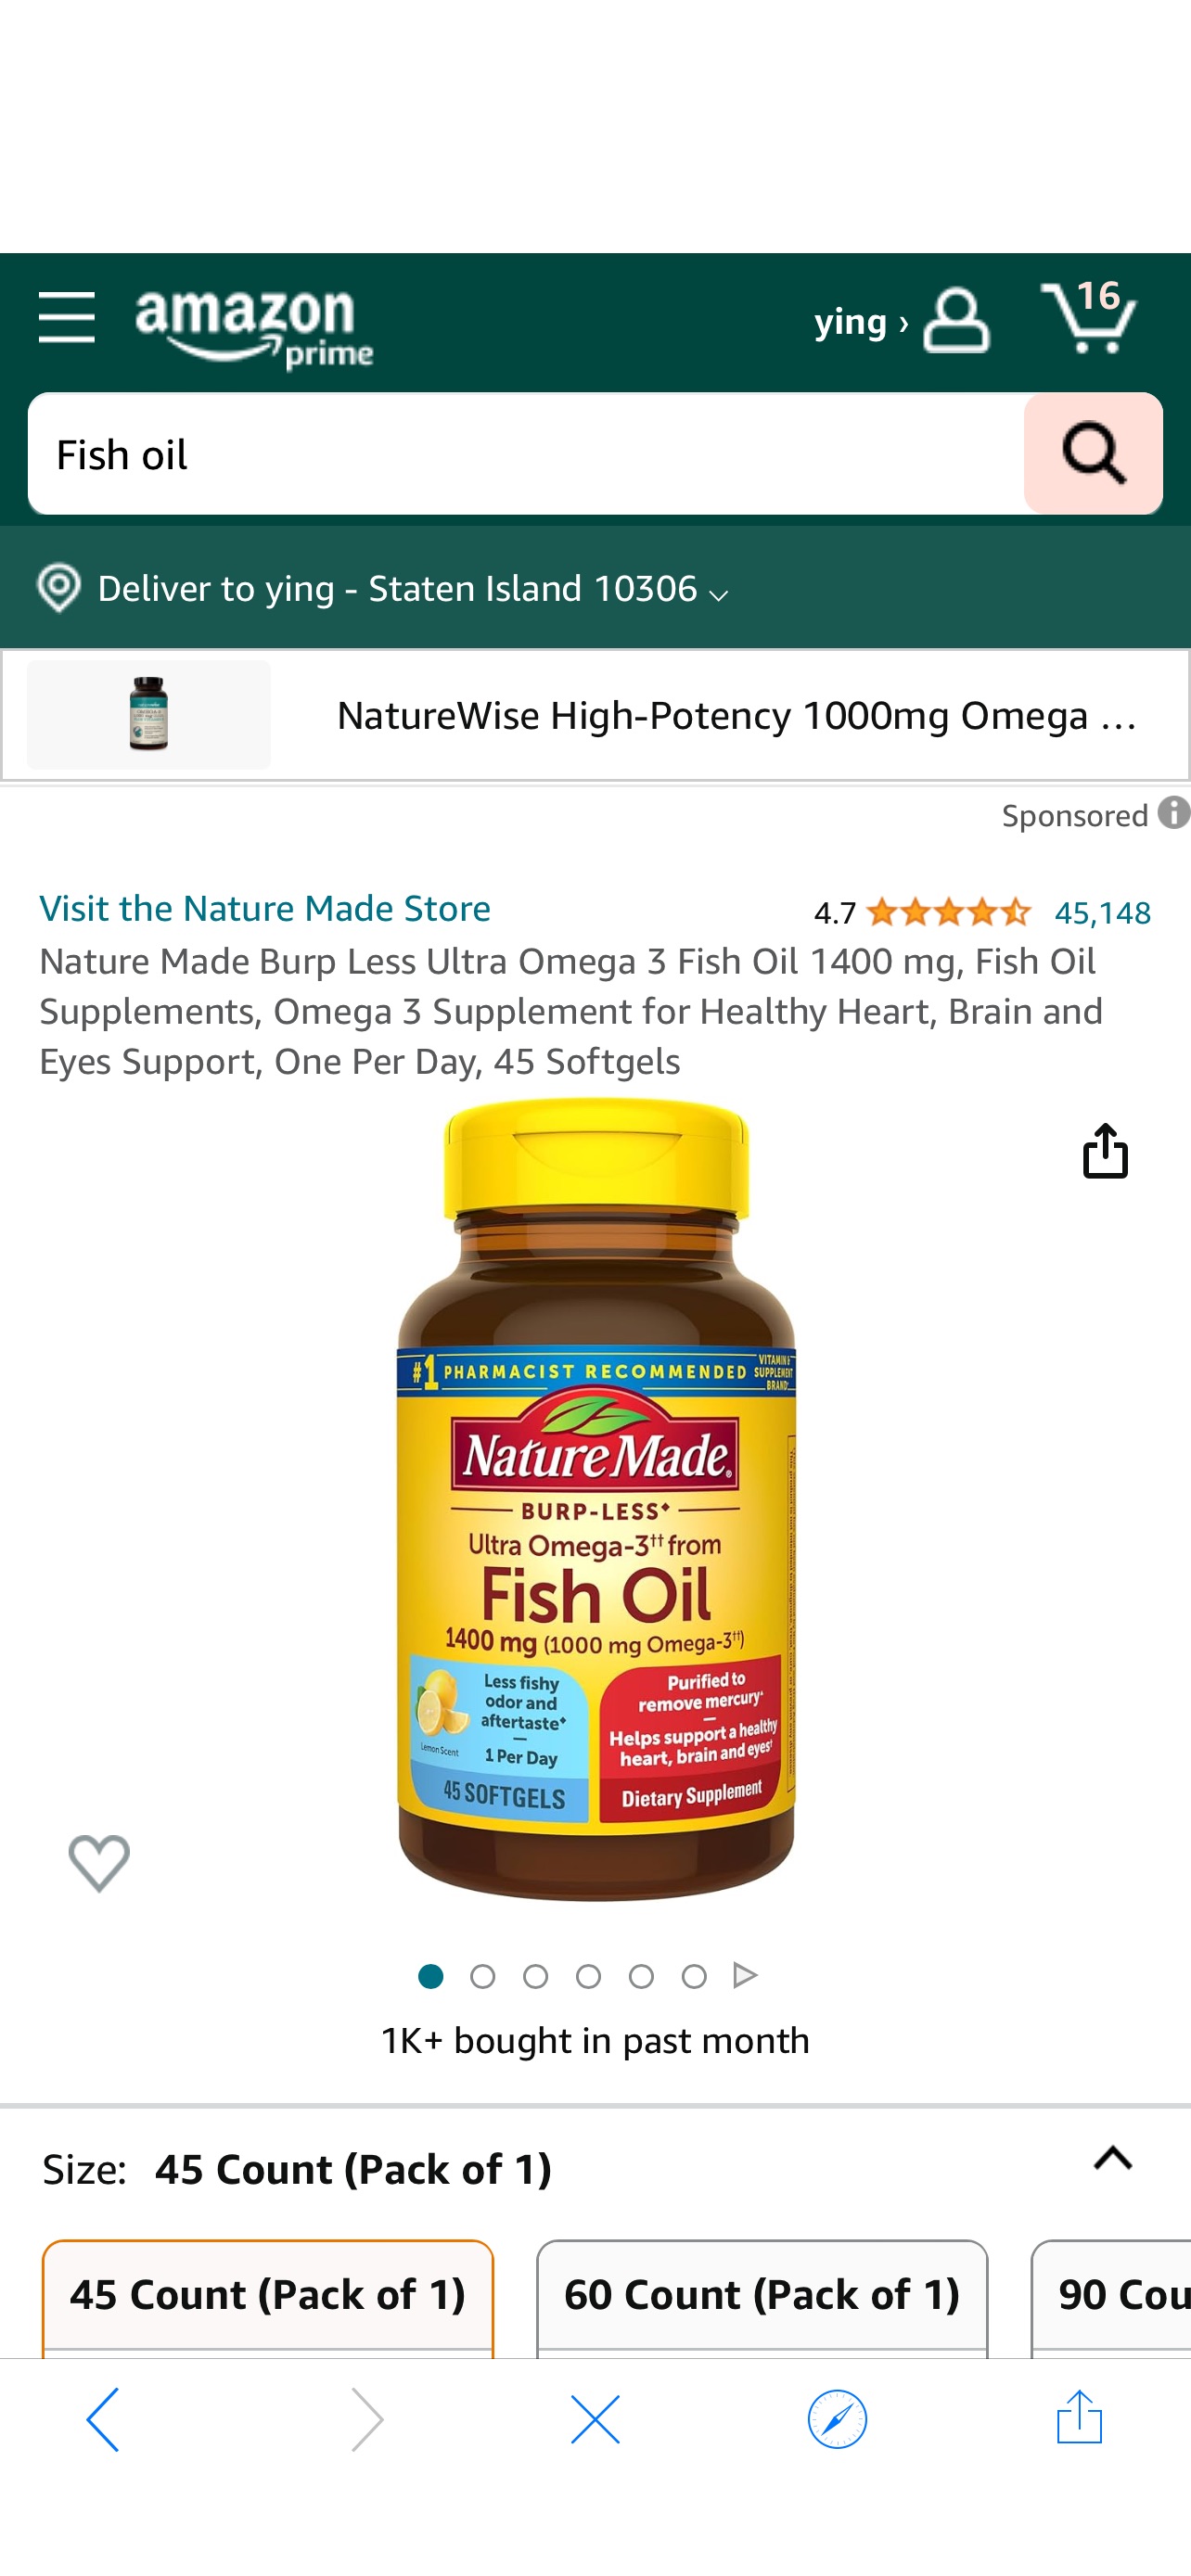 Amazon.com: Nature Made Burp Less Ultra Omega 3 Fish Oil 1400 mg, Fish Oil Supplements, Omega 3 Supplement for Healthy Heart, Brain and Eyes Support, One Per Day, 45 Softgels : Health & Household